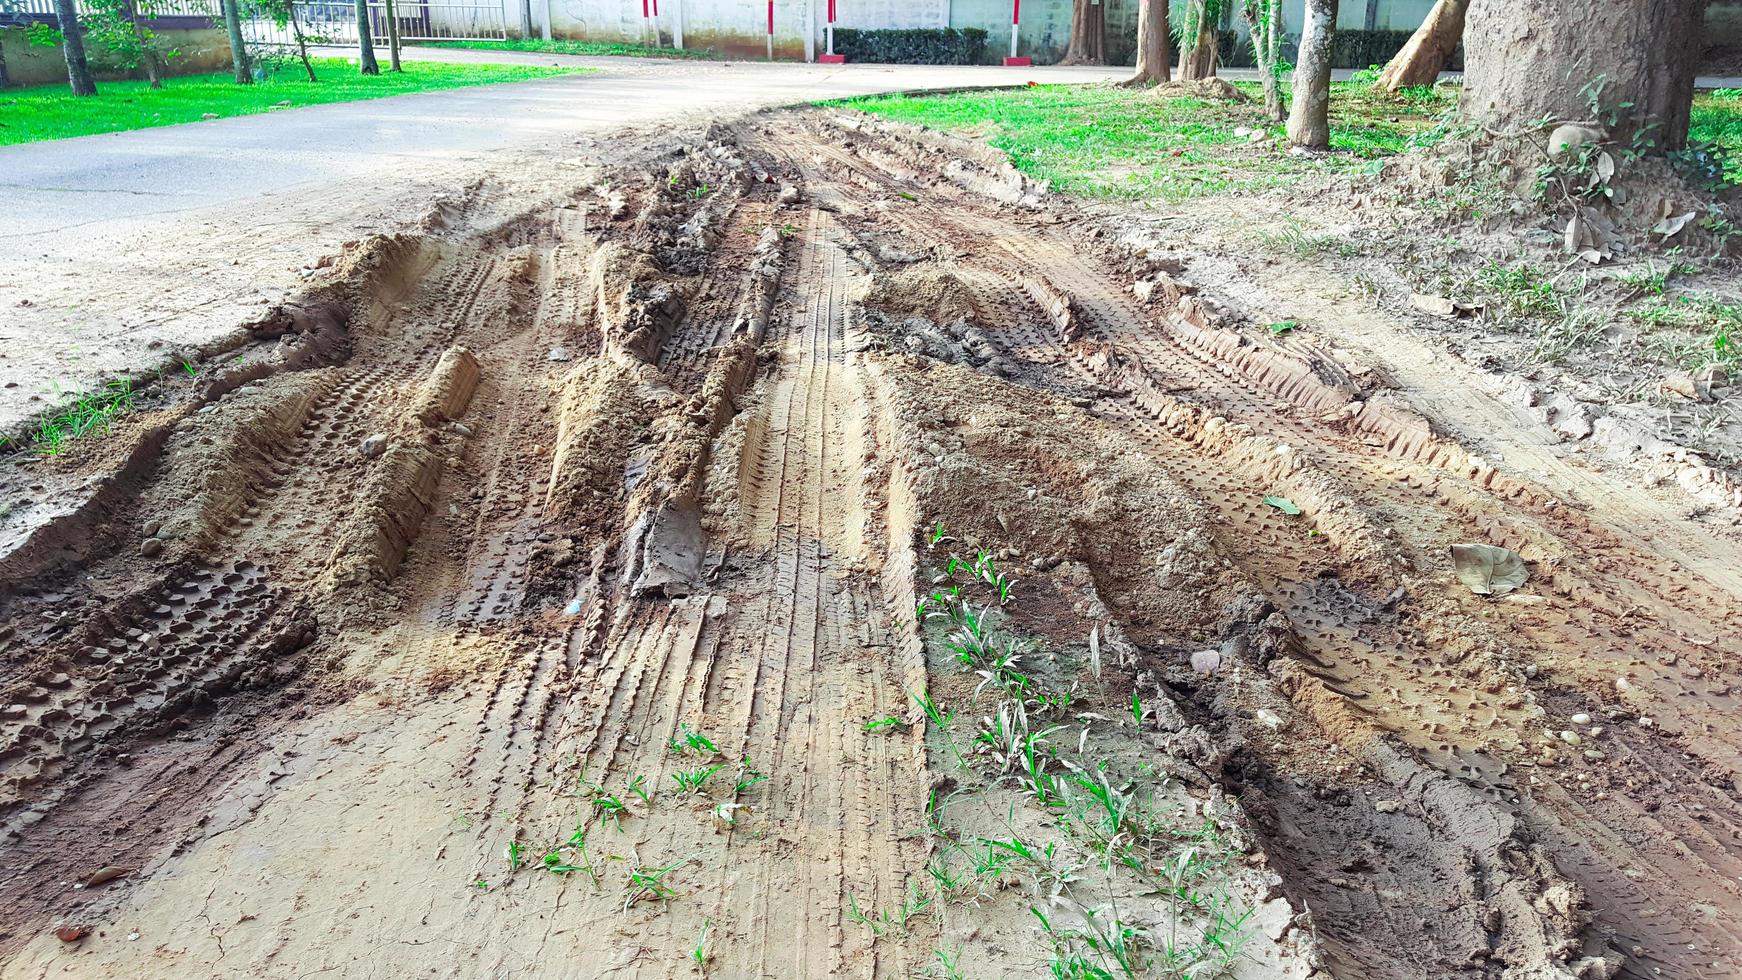 Cartire tracks on dark brown dirt road caused by rain water photo